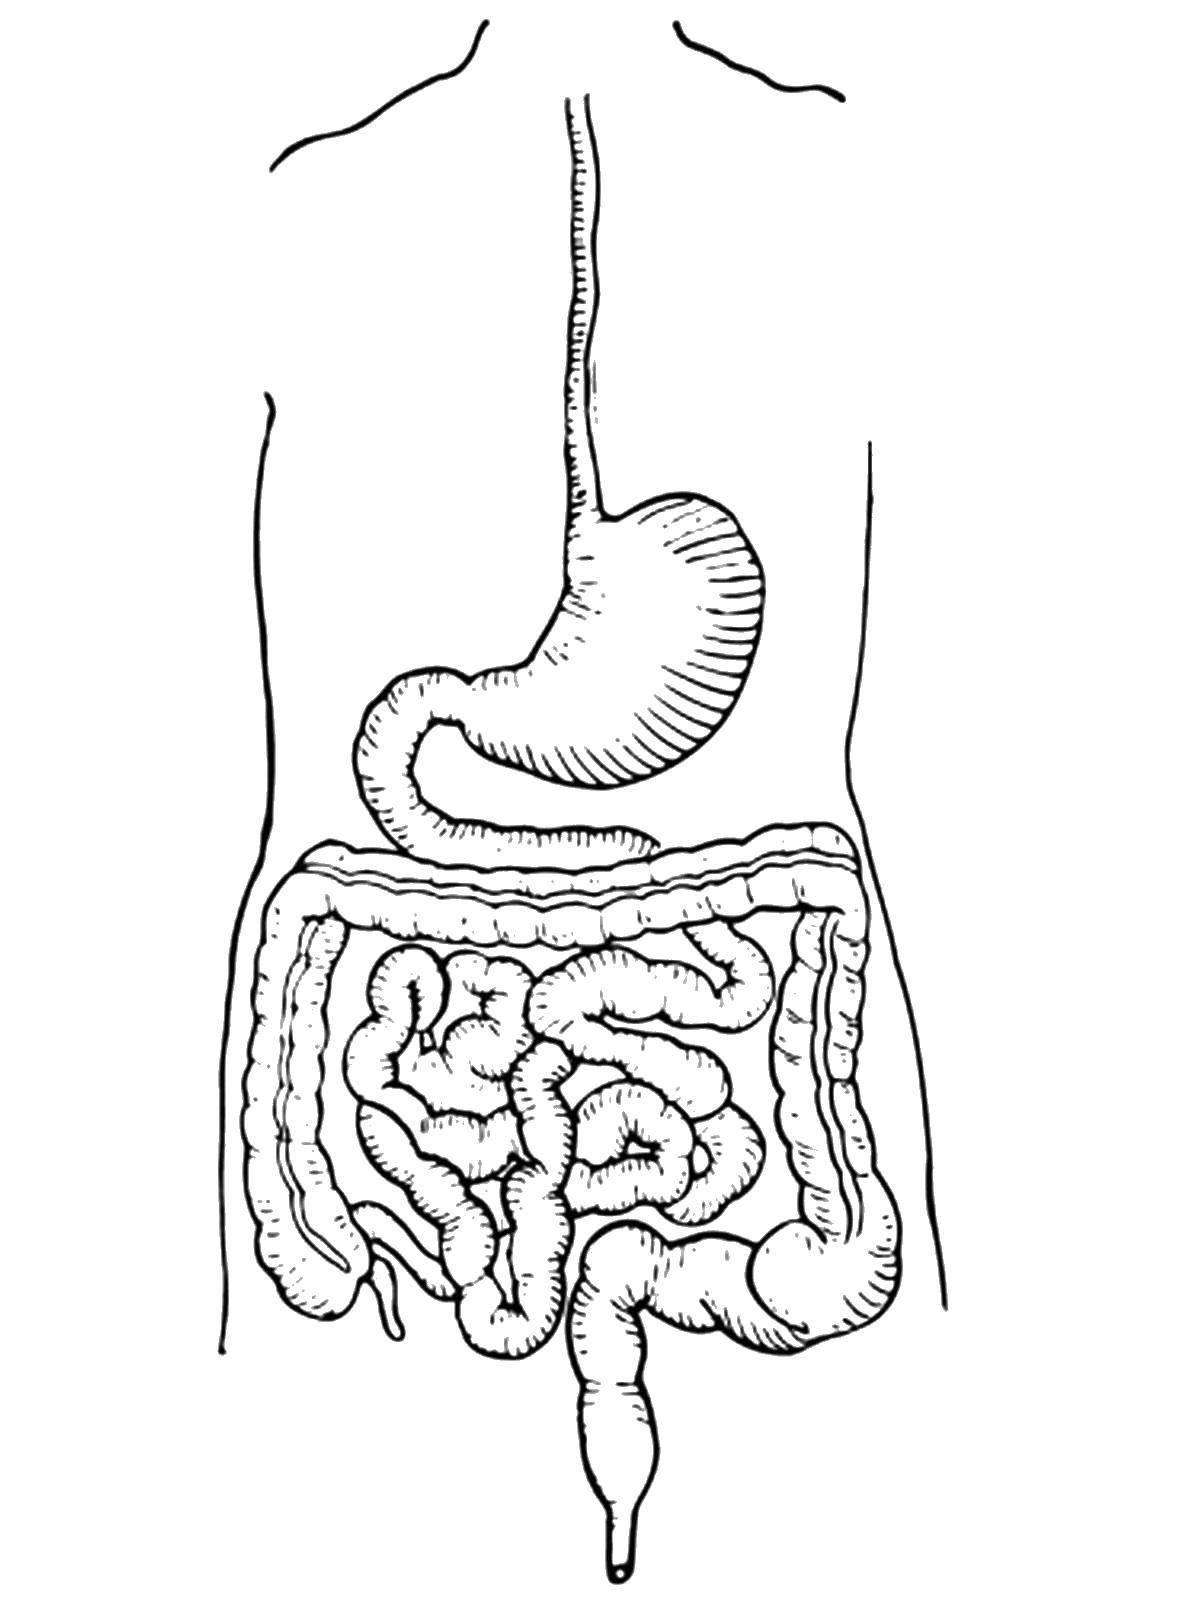 Coloring Digestive system. Category The structure of the body. Tags:  Organ, esophagus.